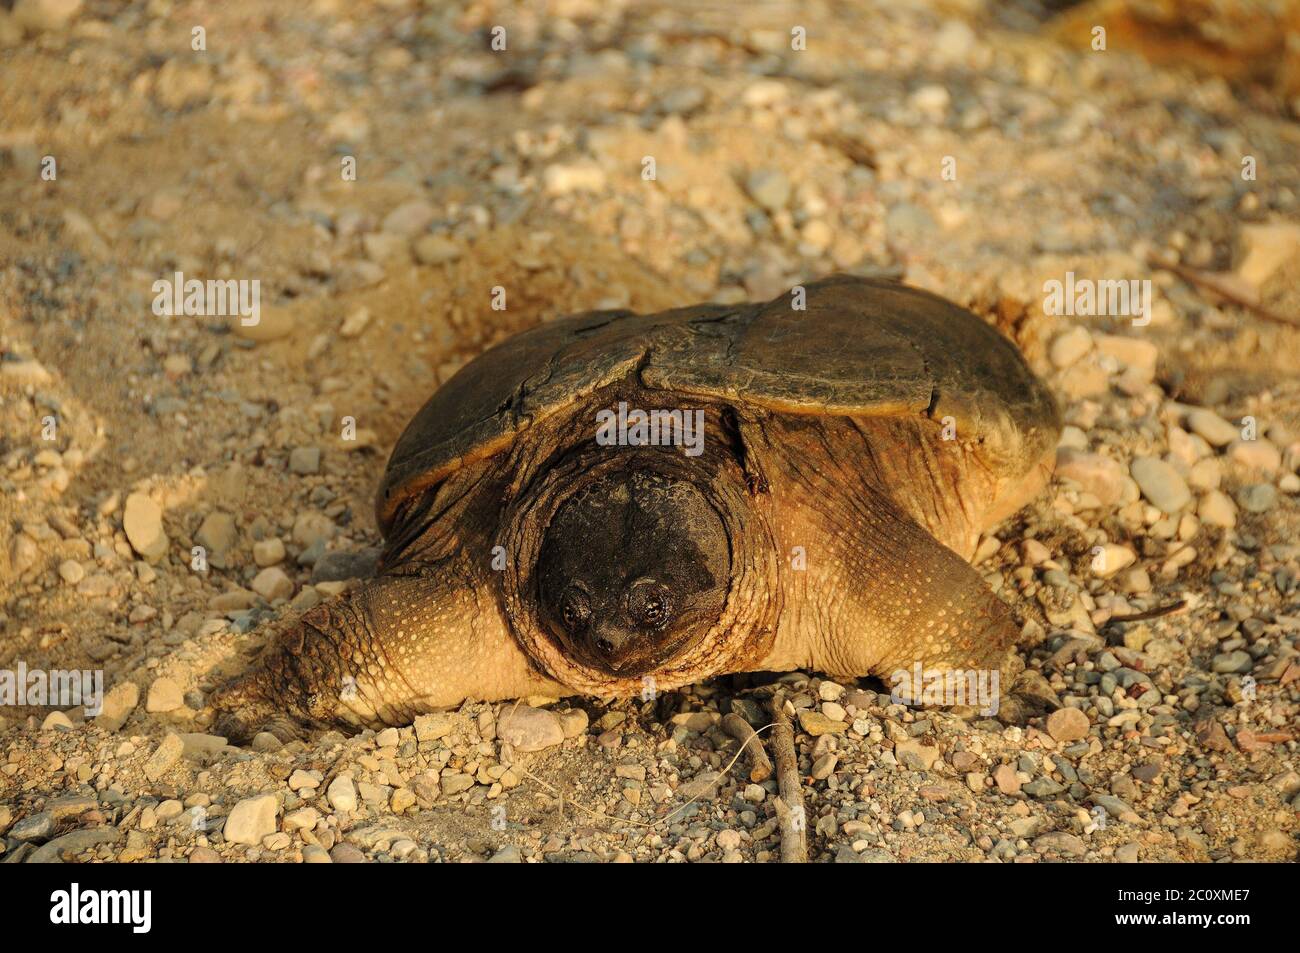 Snapping Turtle in its environment and surrounding. Stock Photo